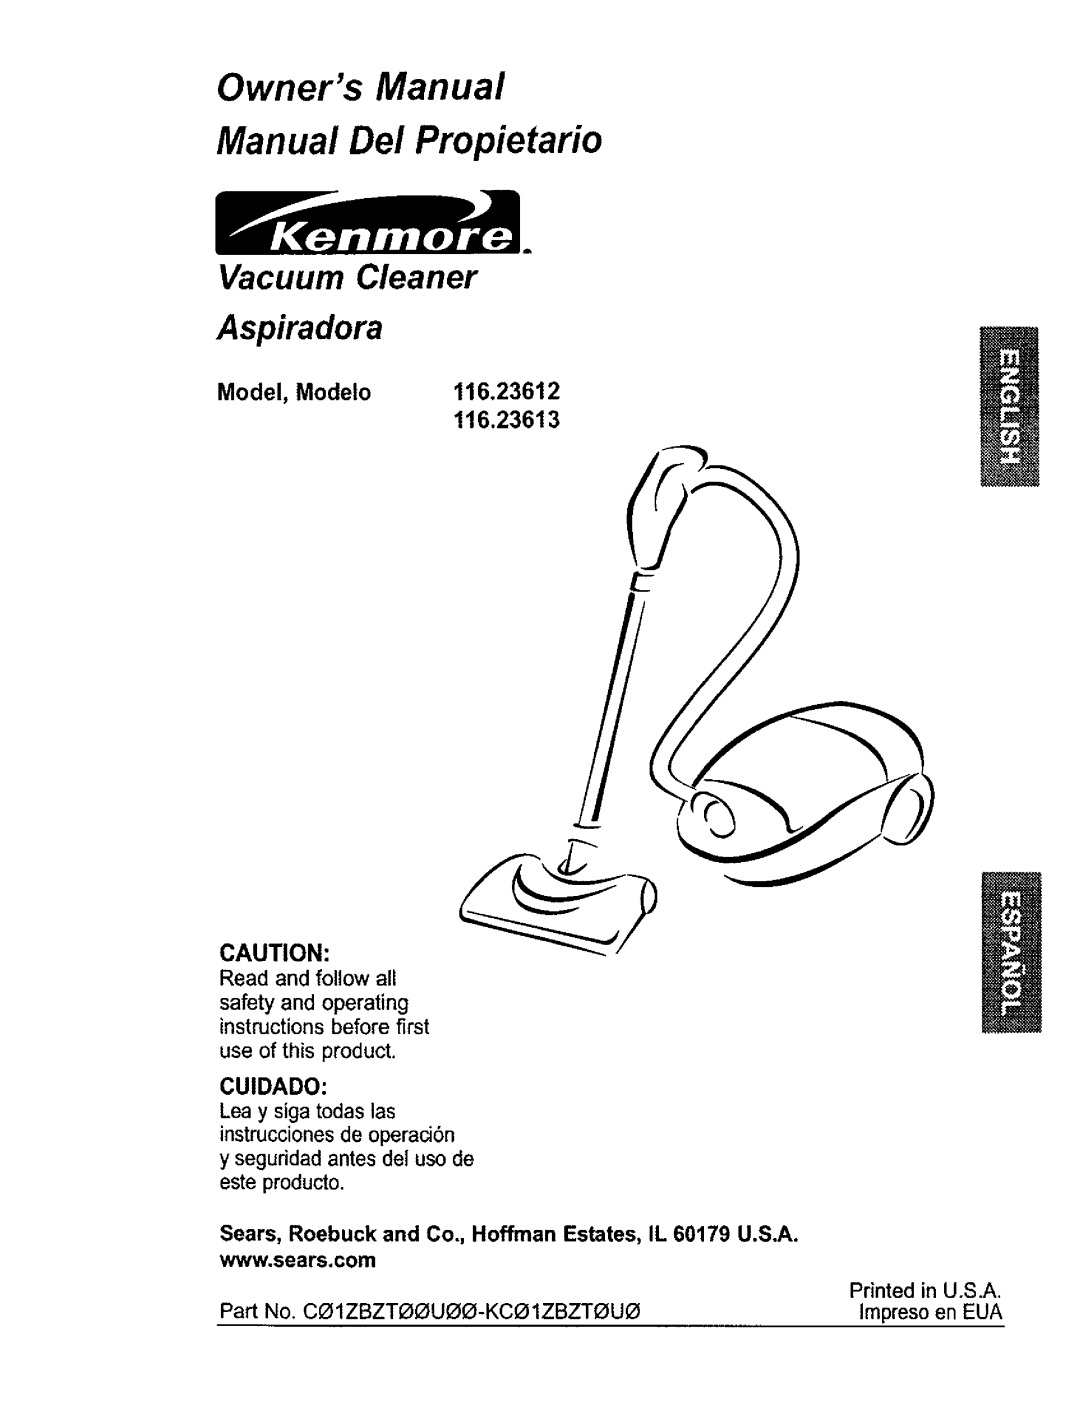 Kenmore 11623613300 owner manual 116.23613, Model, Modelo116.23612, Read and follow all, use of this product, Cuidado 